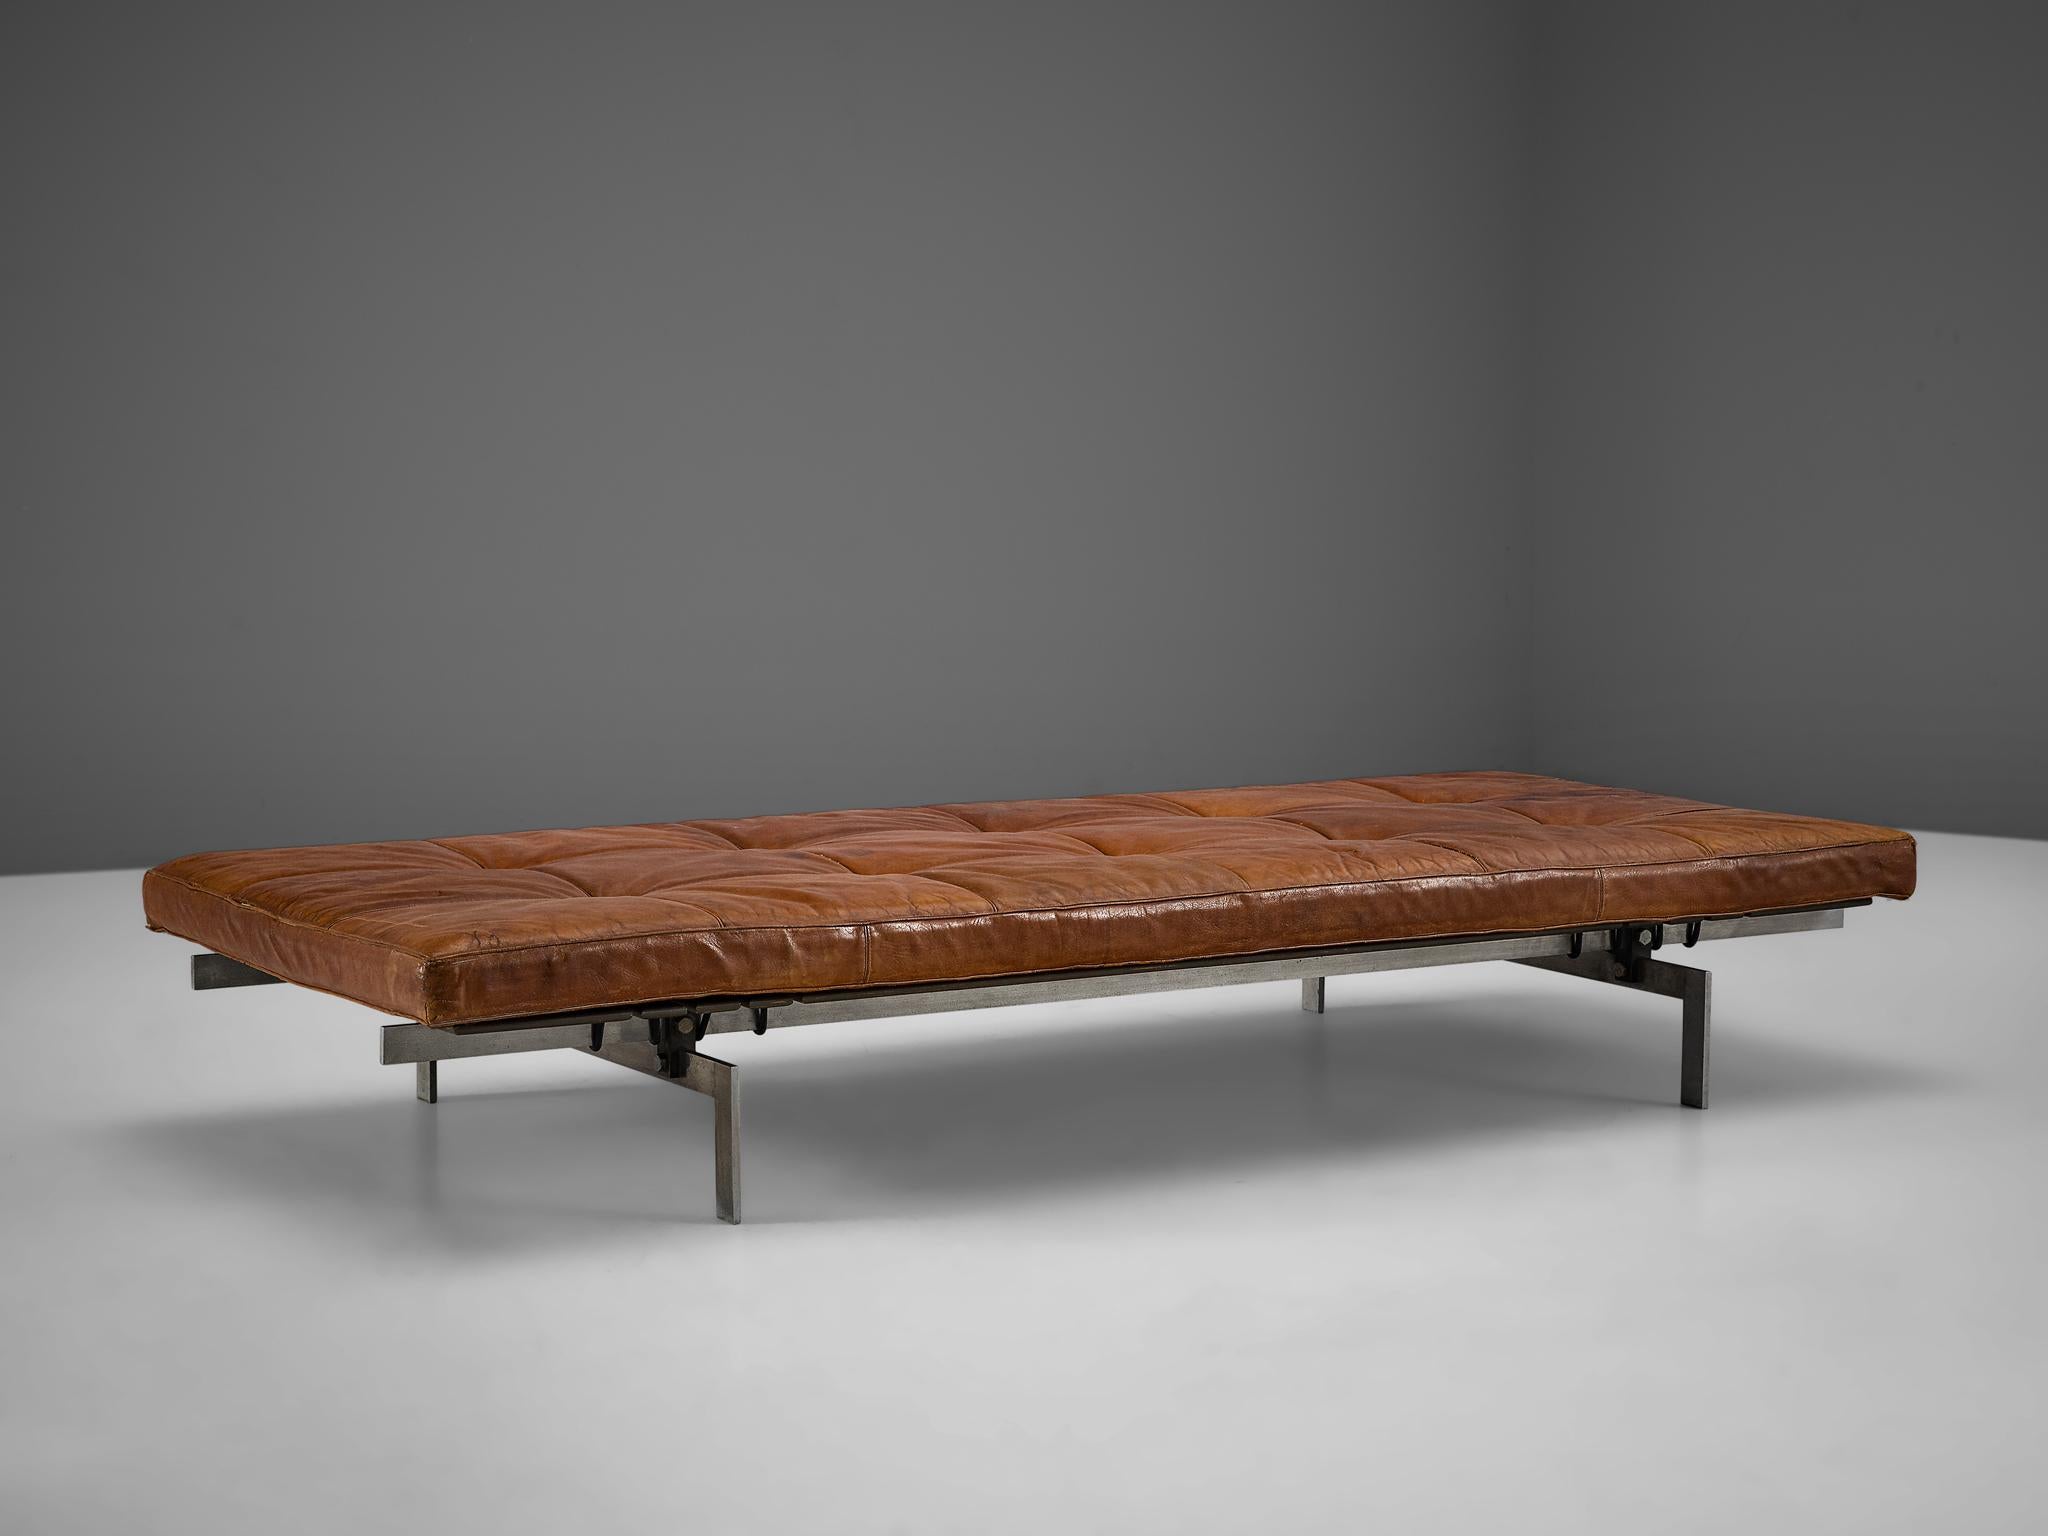 Danish Poul Kjærholm Daybed Pk80 in Patinated Cognac Leather